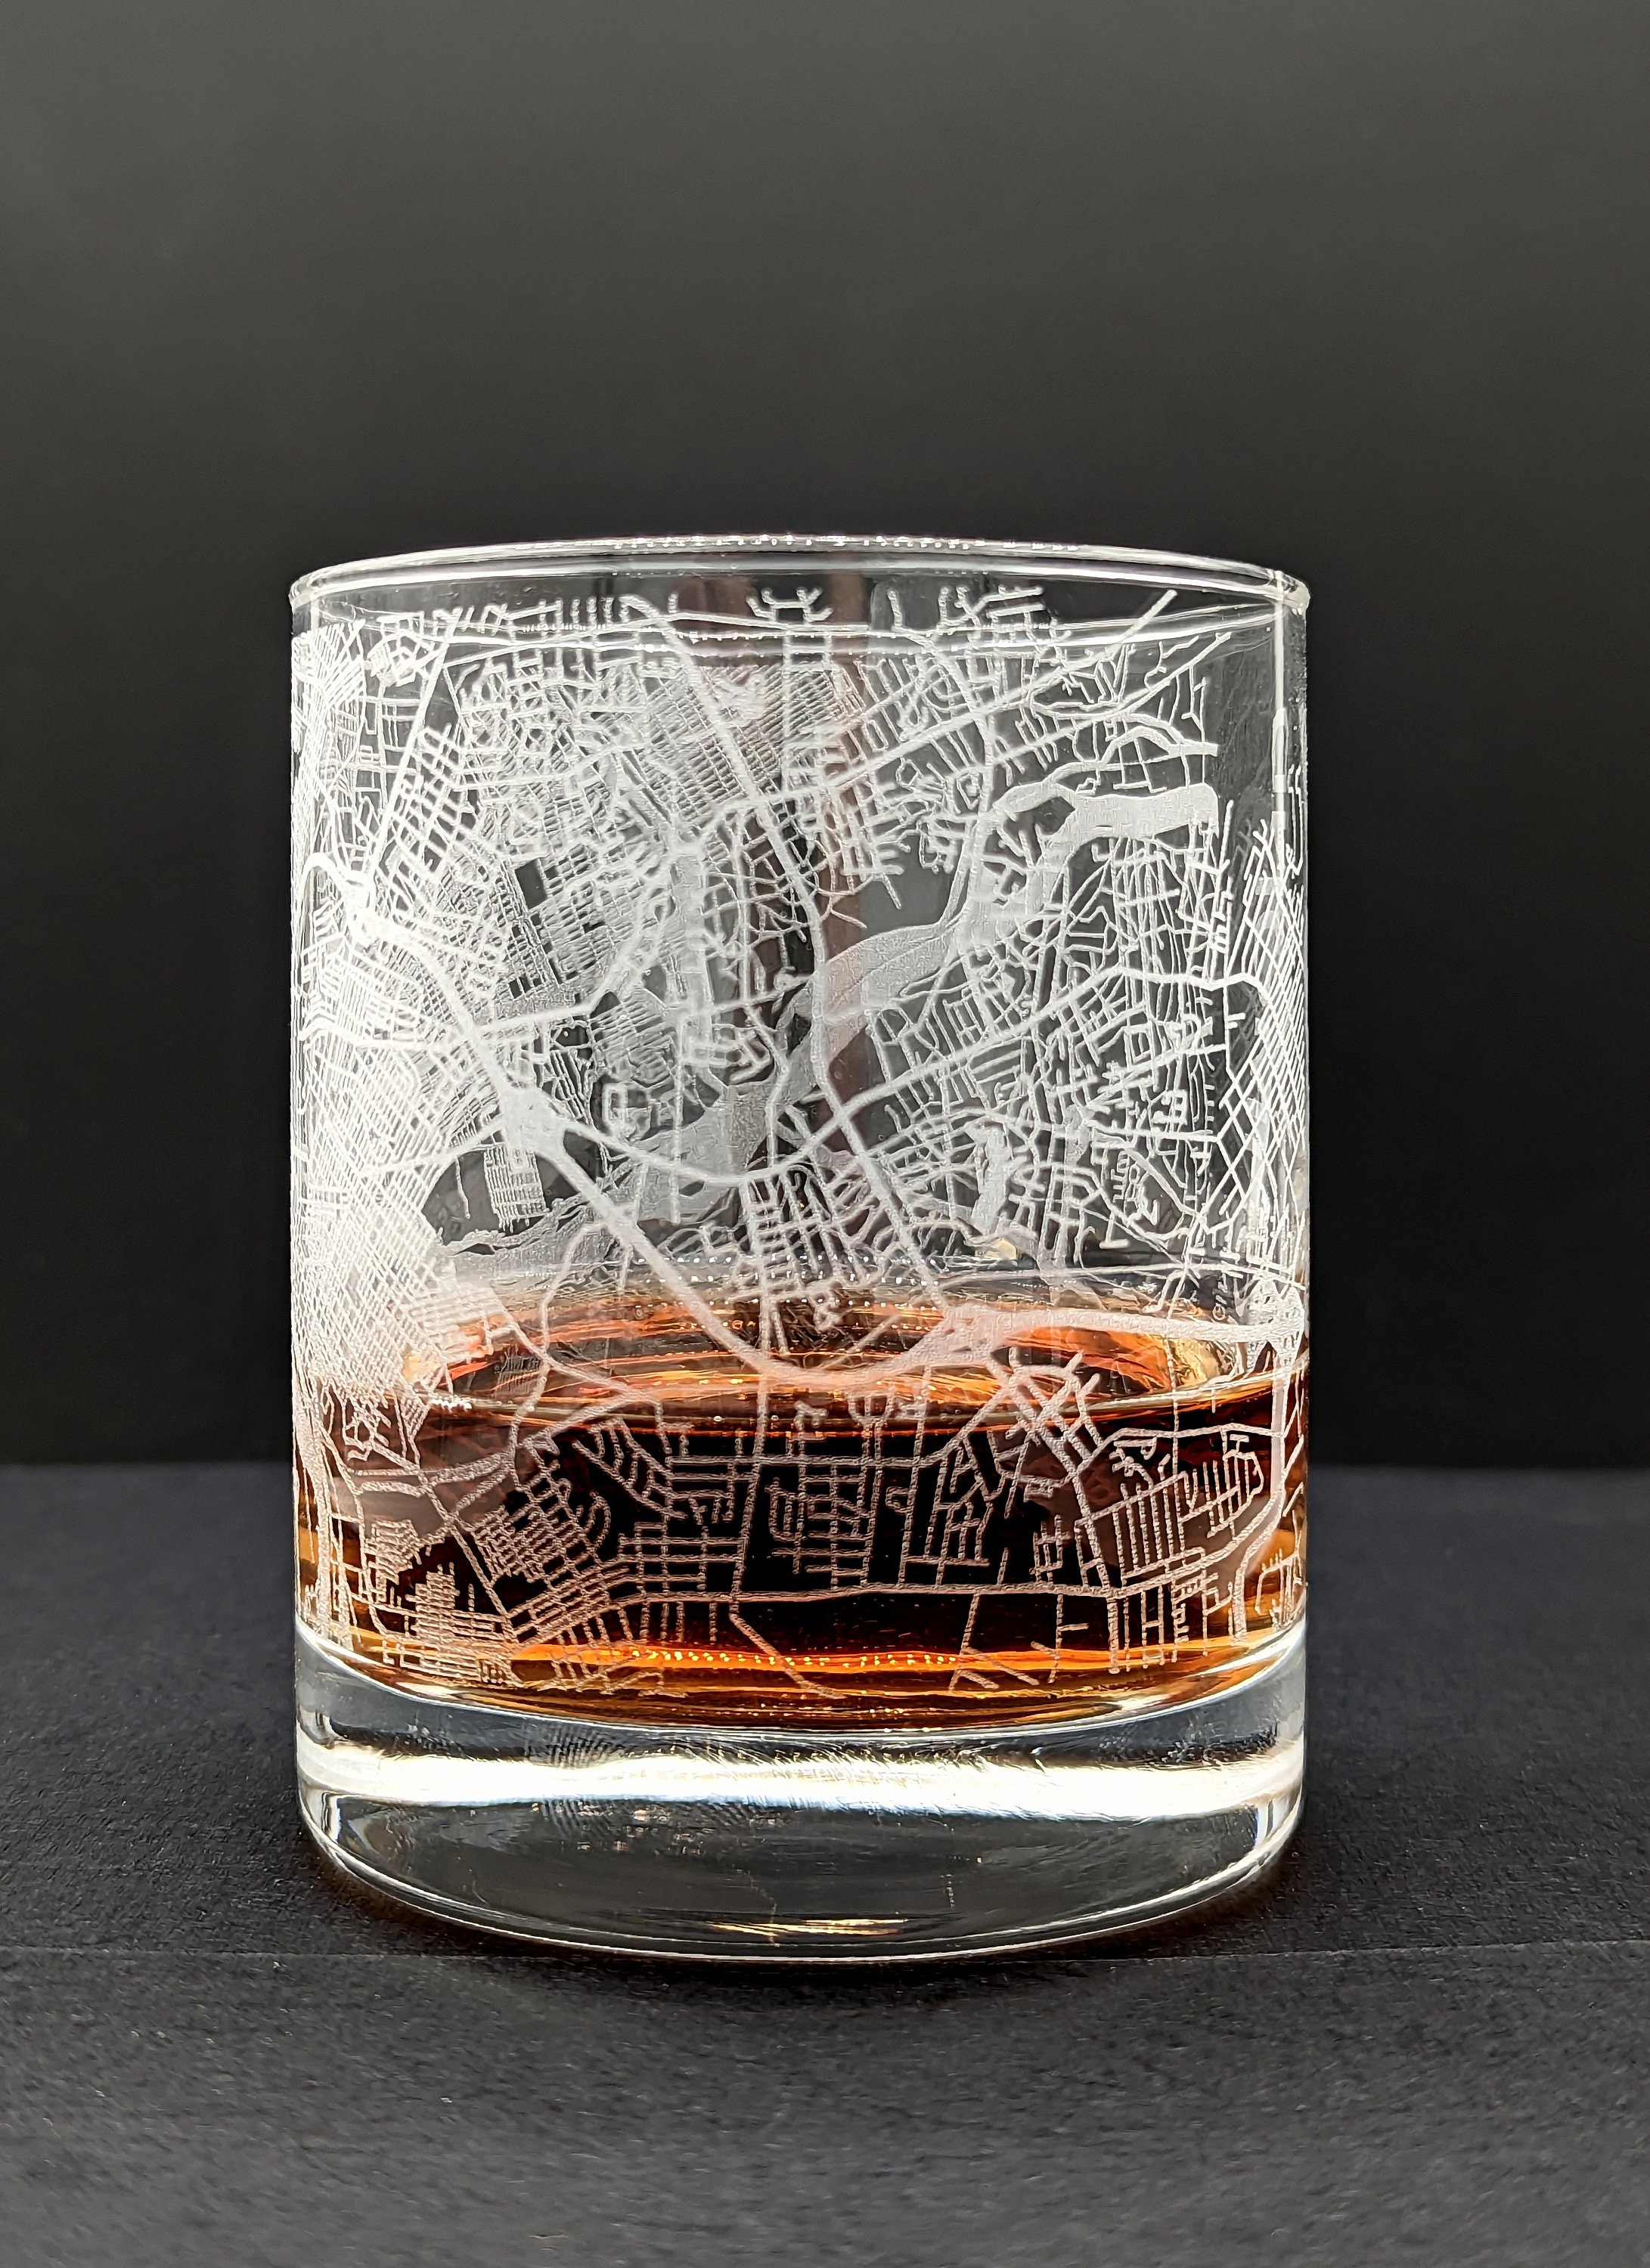 Rocks Whiskey Old Fashioned 11oz Glass Urban City Map  Louisville Kentucky: Old Fashioned Glasses